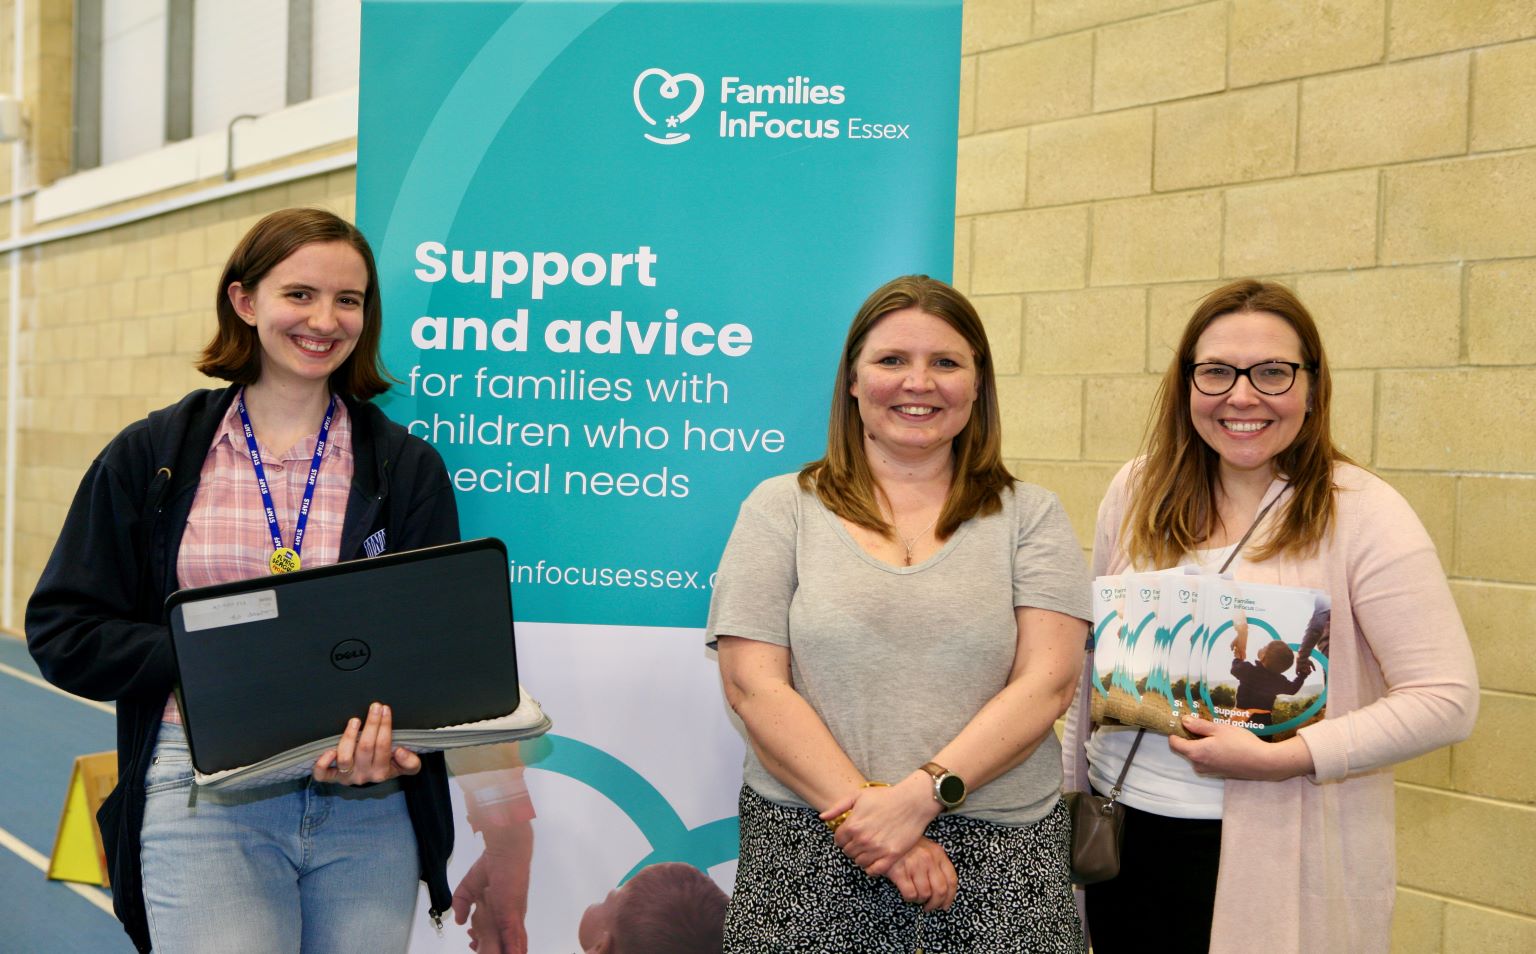 Three Families InFocus staff standing in front of a Families InFocus banner. One is holding a laptop and one is holding leaflets.